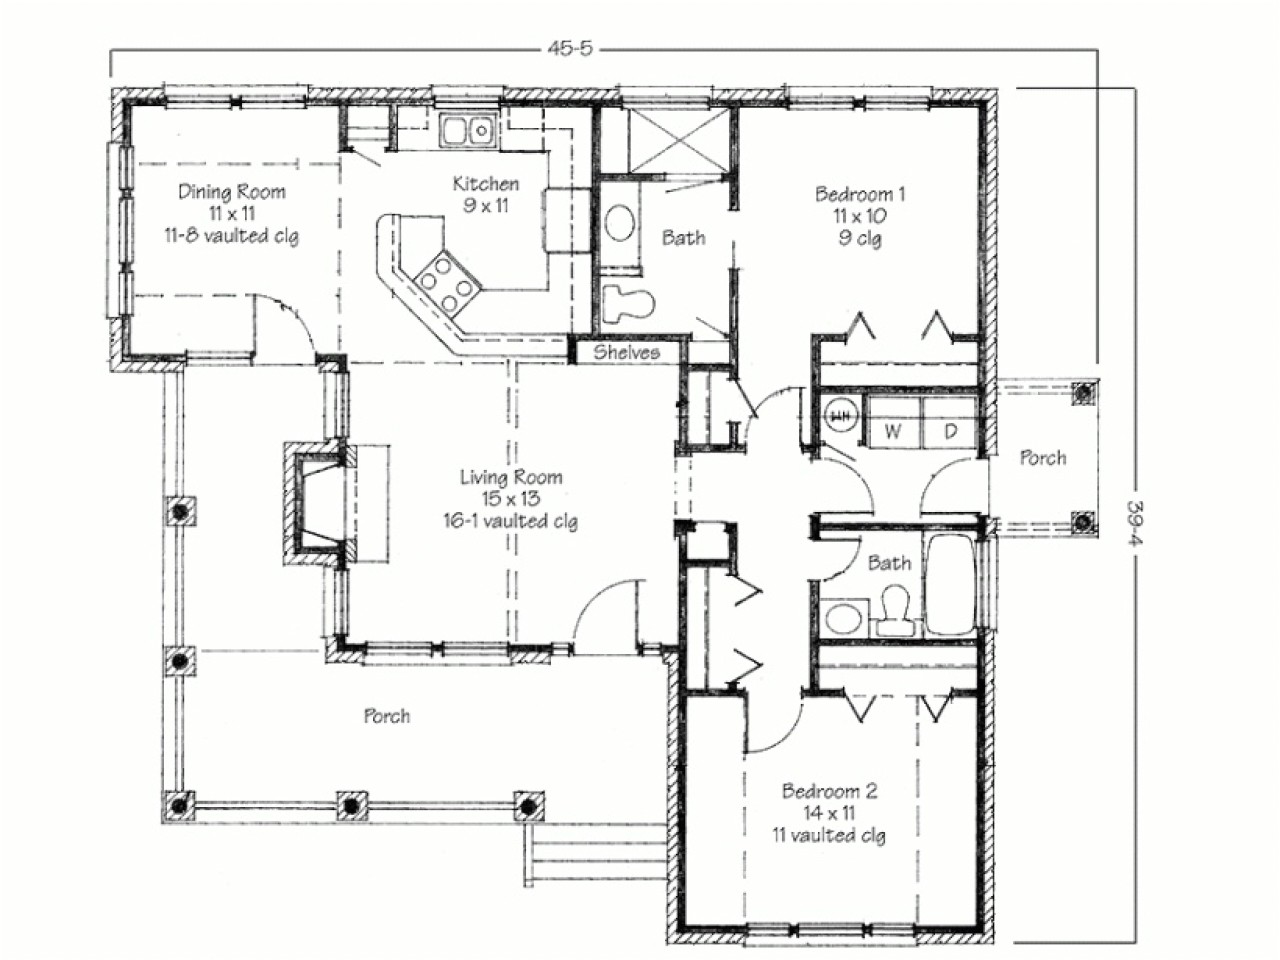 Simplistic House Plans Two Bedroom House Simple Floor Plans House Plans 2 Bedroom